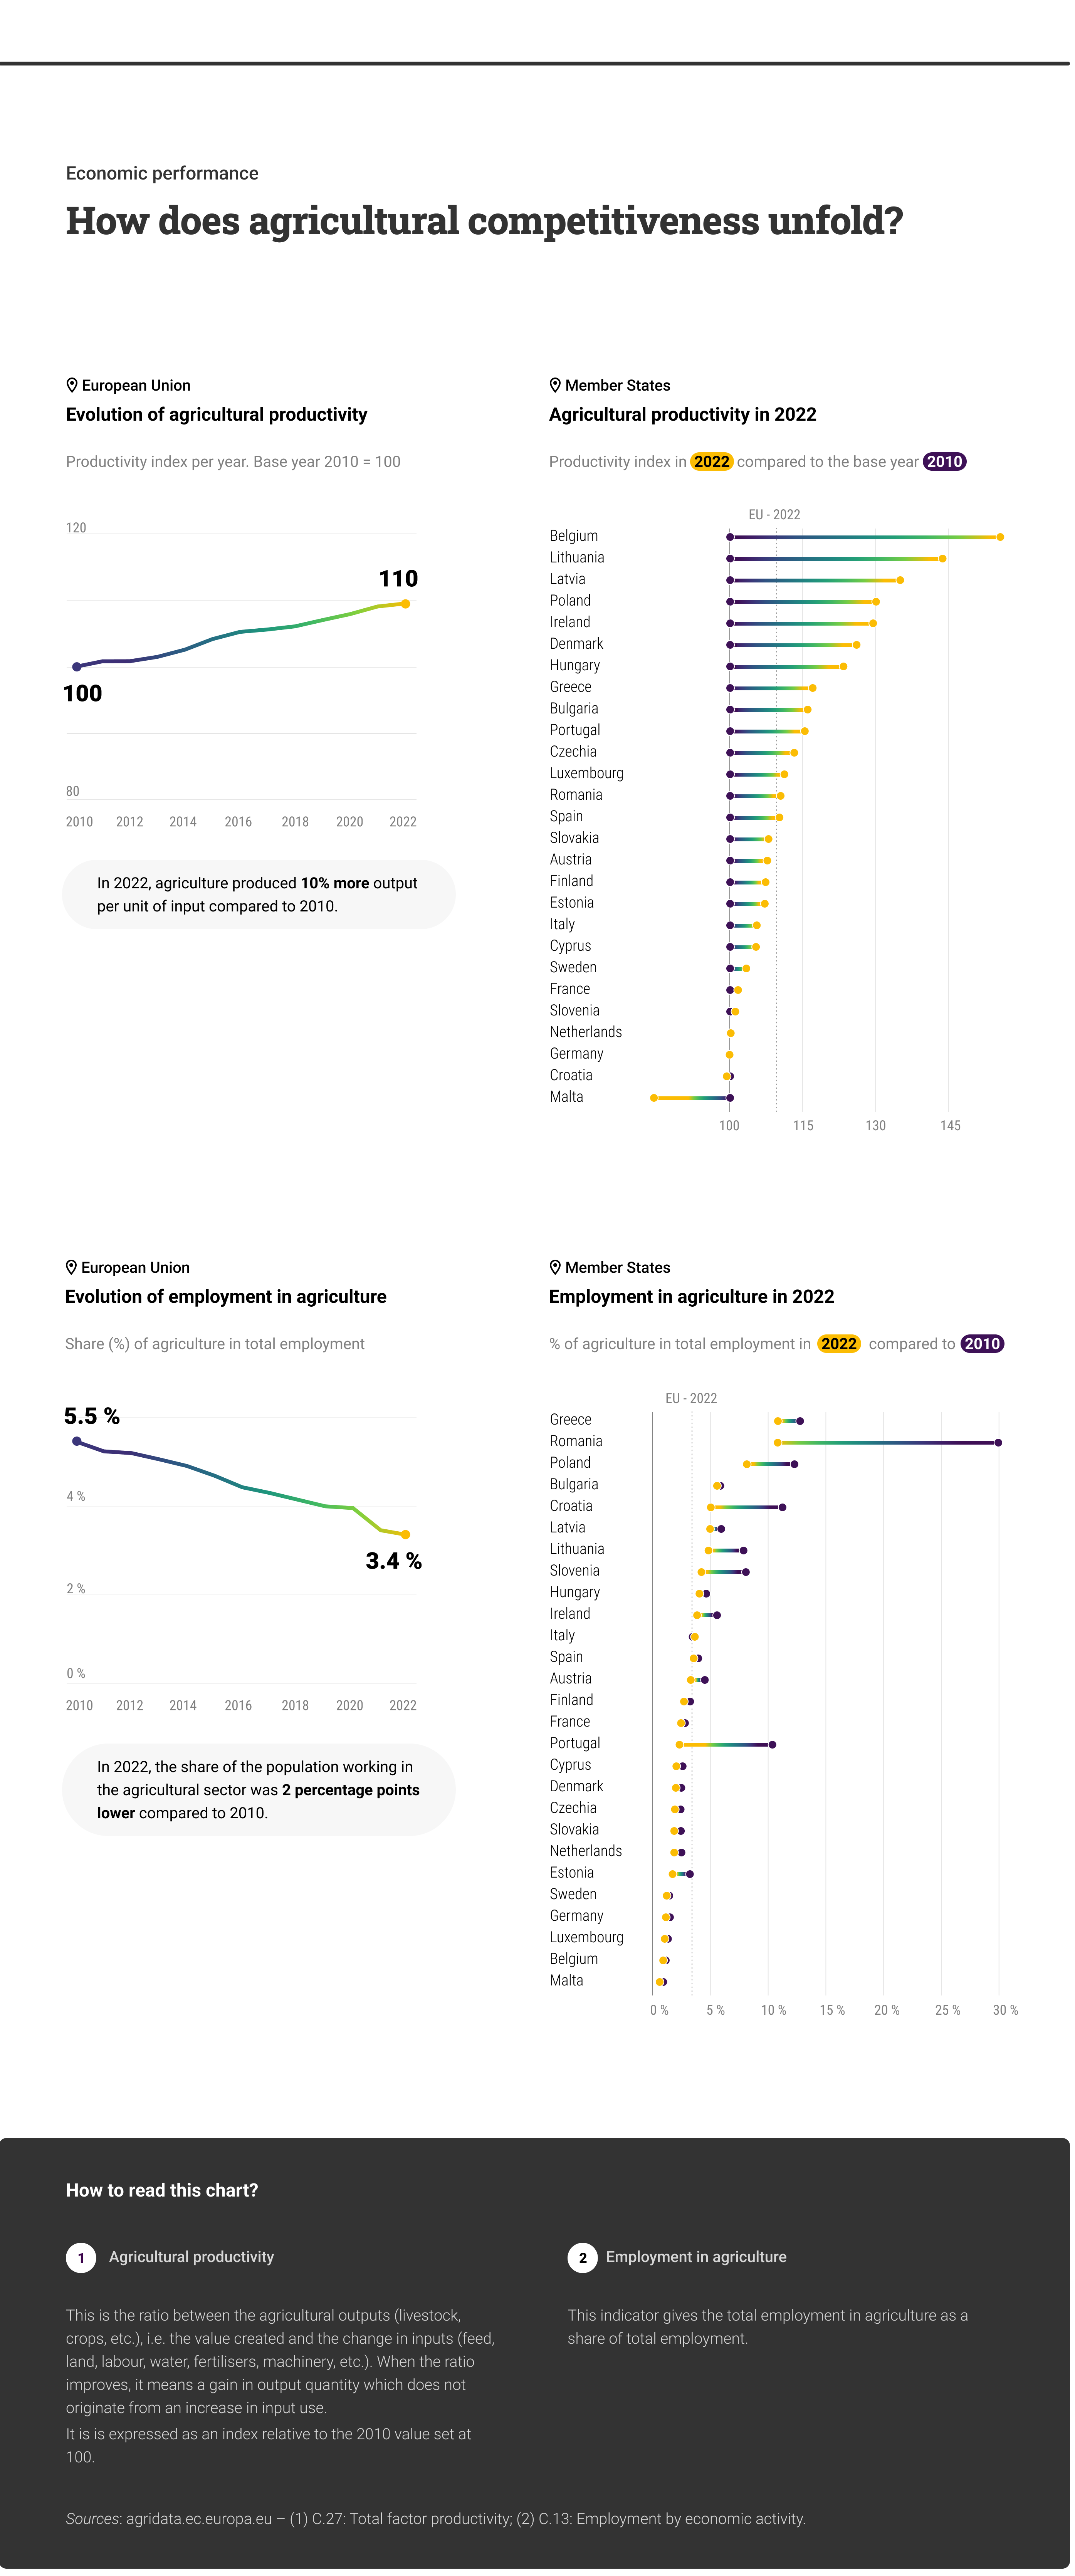 Figure 1: The change in agricultural productivity and the share of total employment in the agricultural sector between 2010 and 2022 in the EU Member States (source: DG AGRI) 